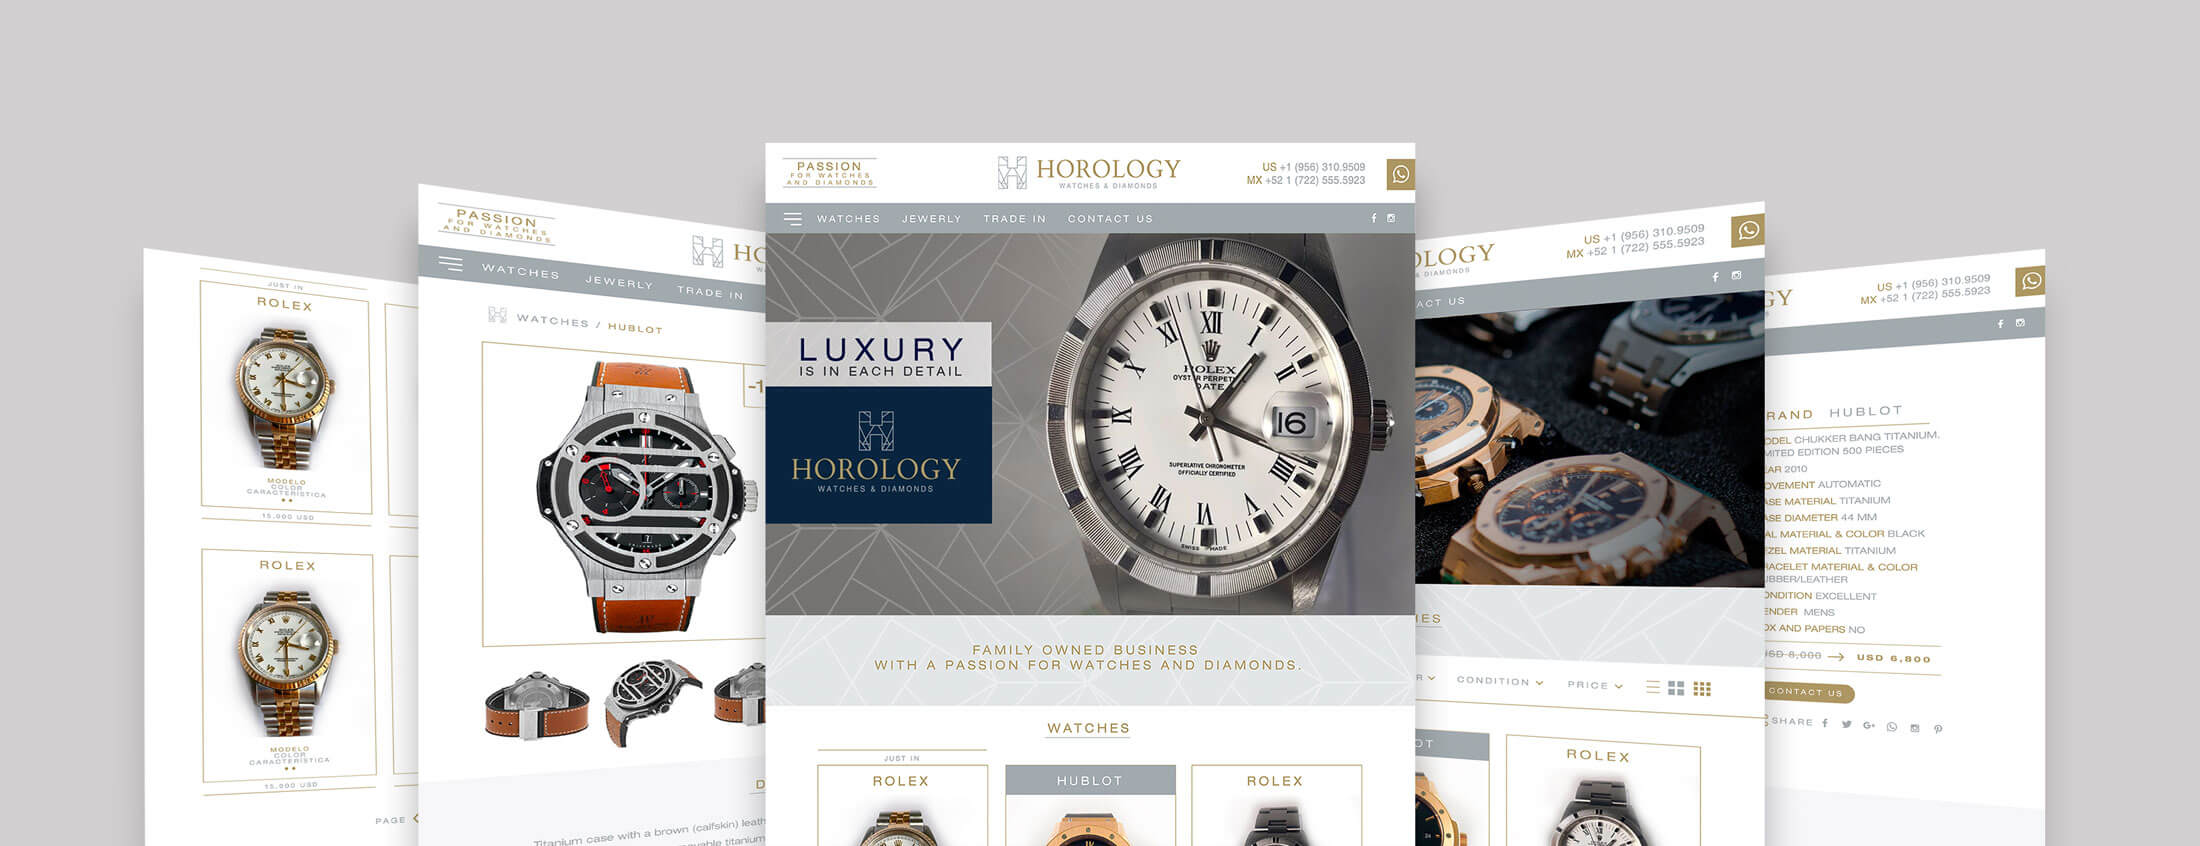 Diseño Web Auto-Administrable Horology Watches and Diamonds